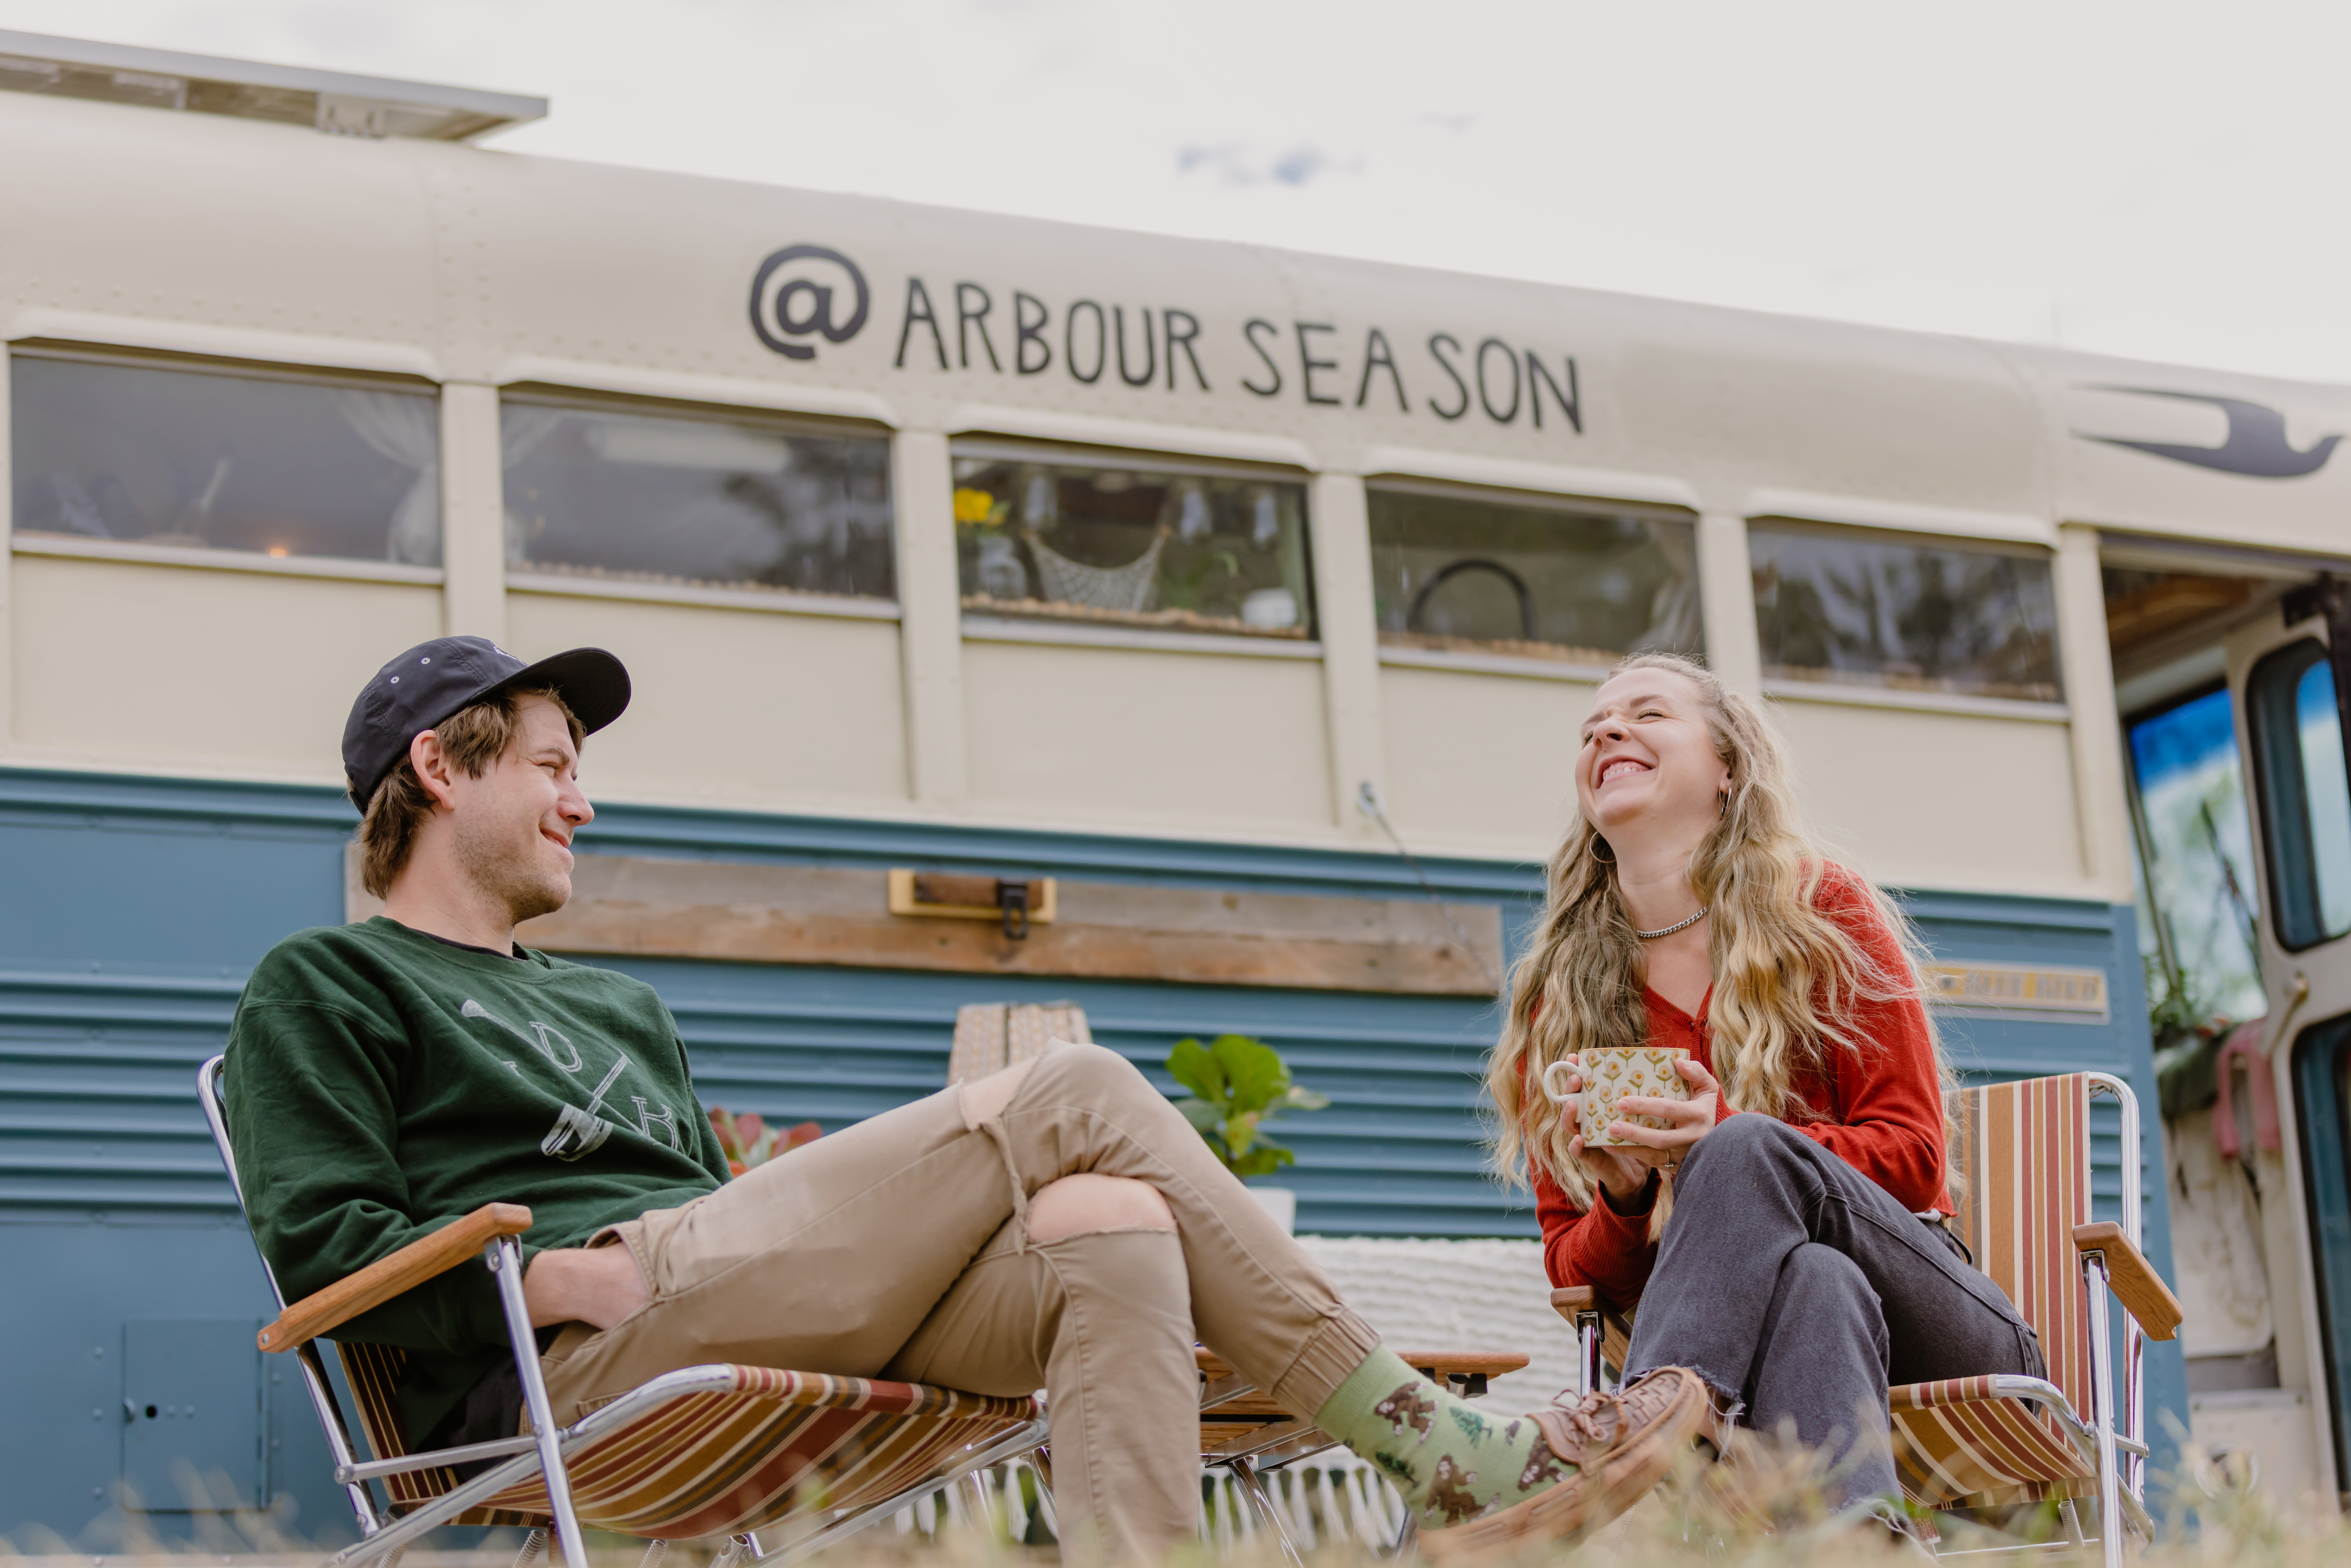 Shane and Emily From Arbour Season Having Coffee in Front of Their Converted Skoolie